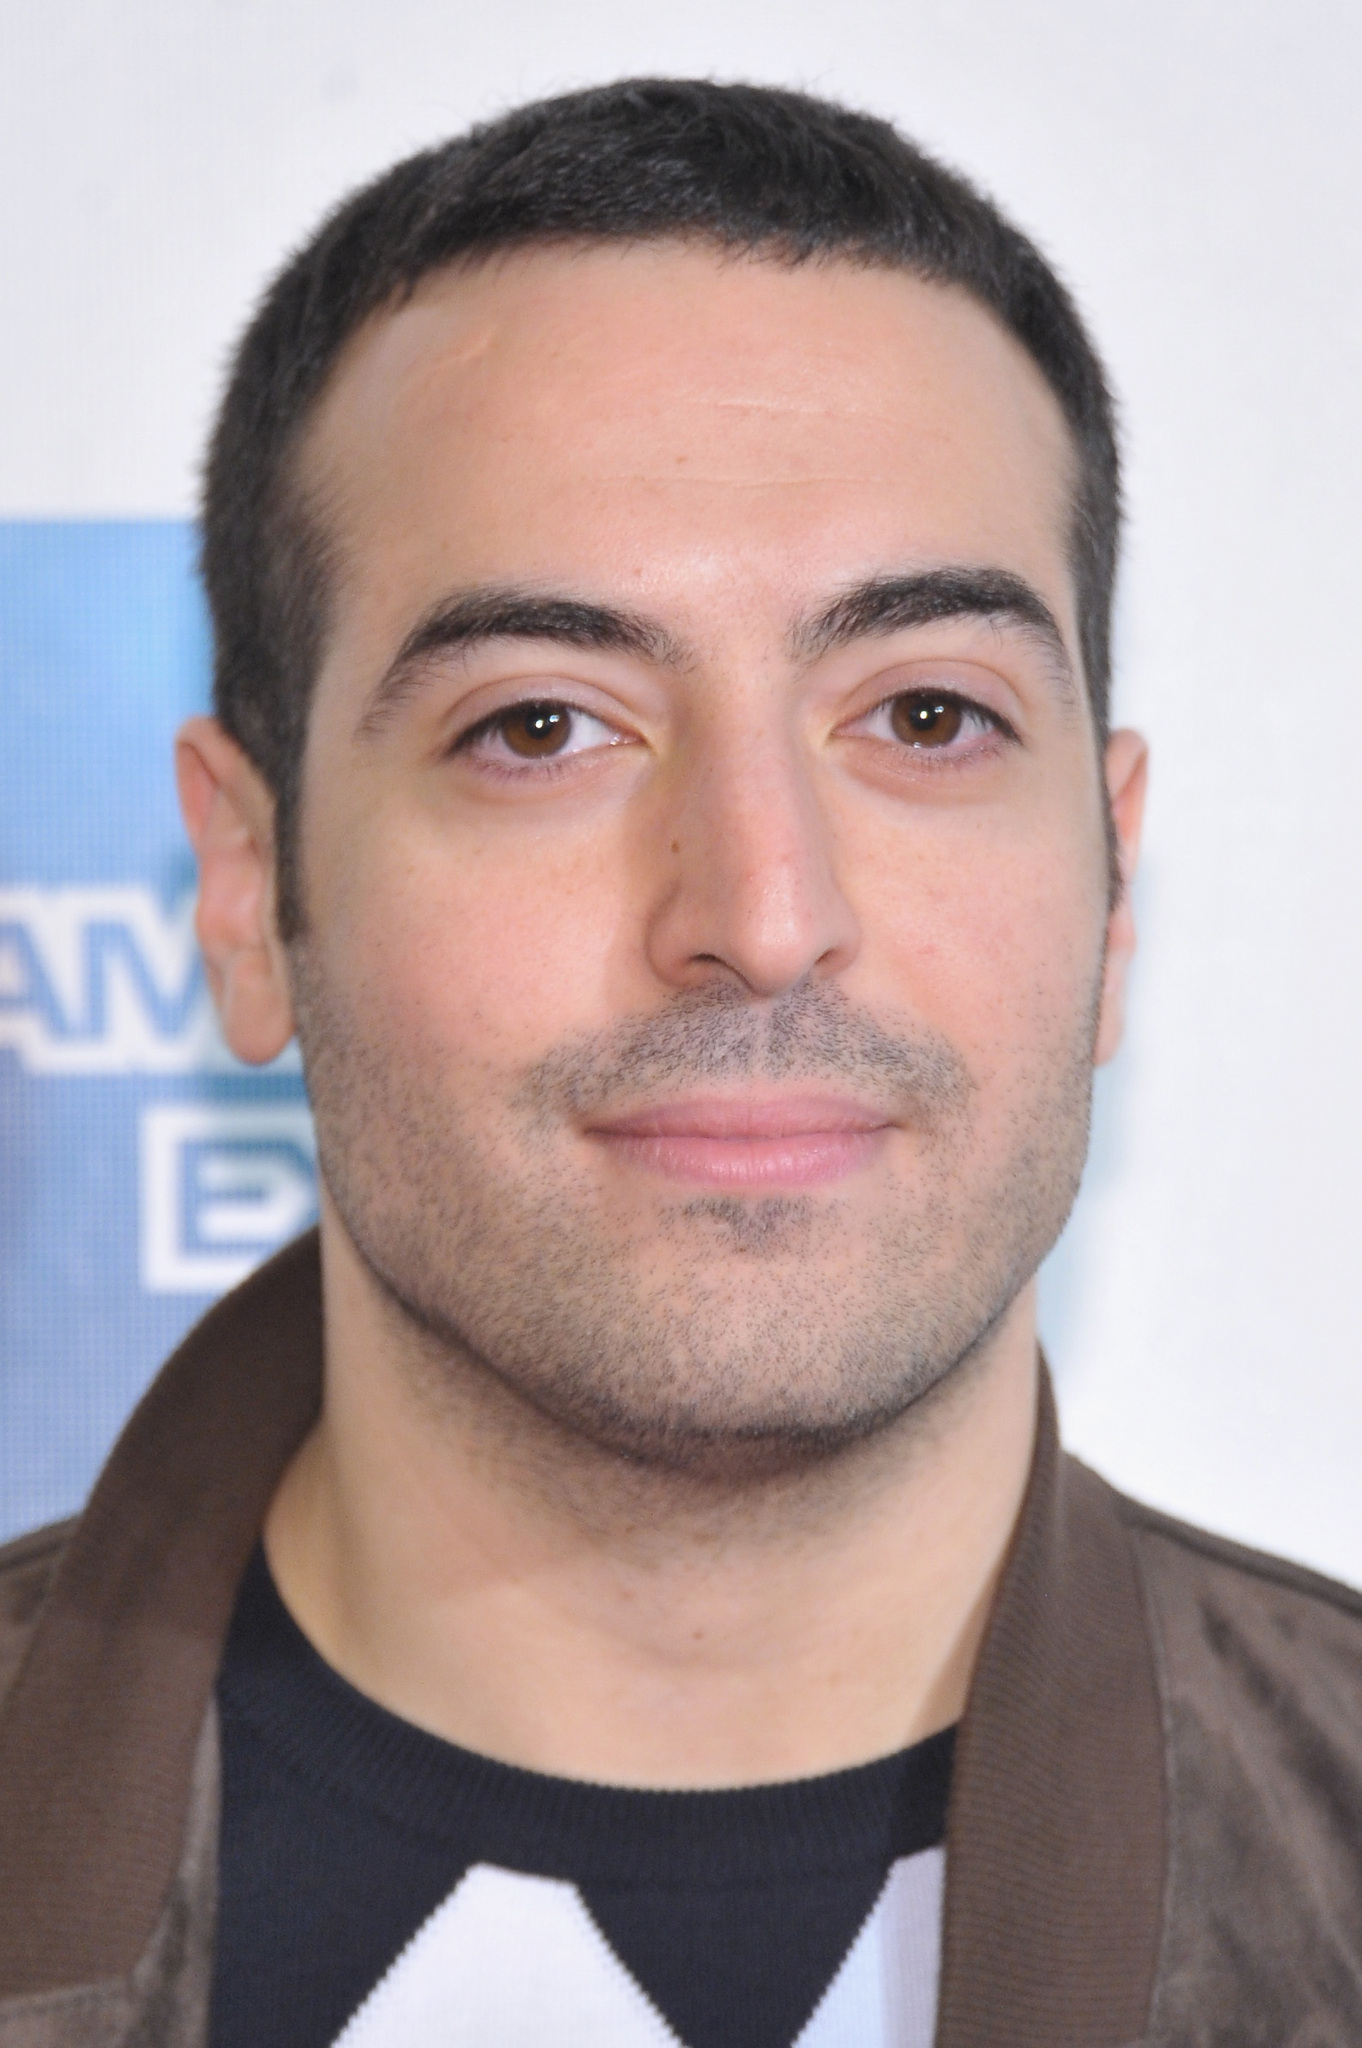 Mohammed Al Turki at event of Adult World (2013)